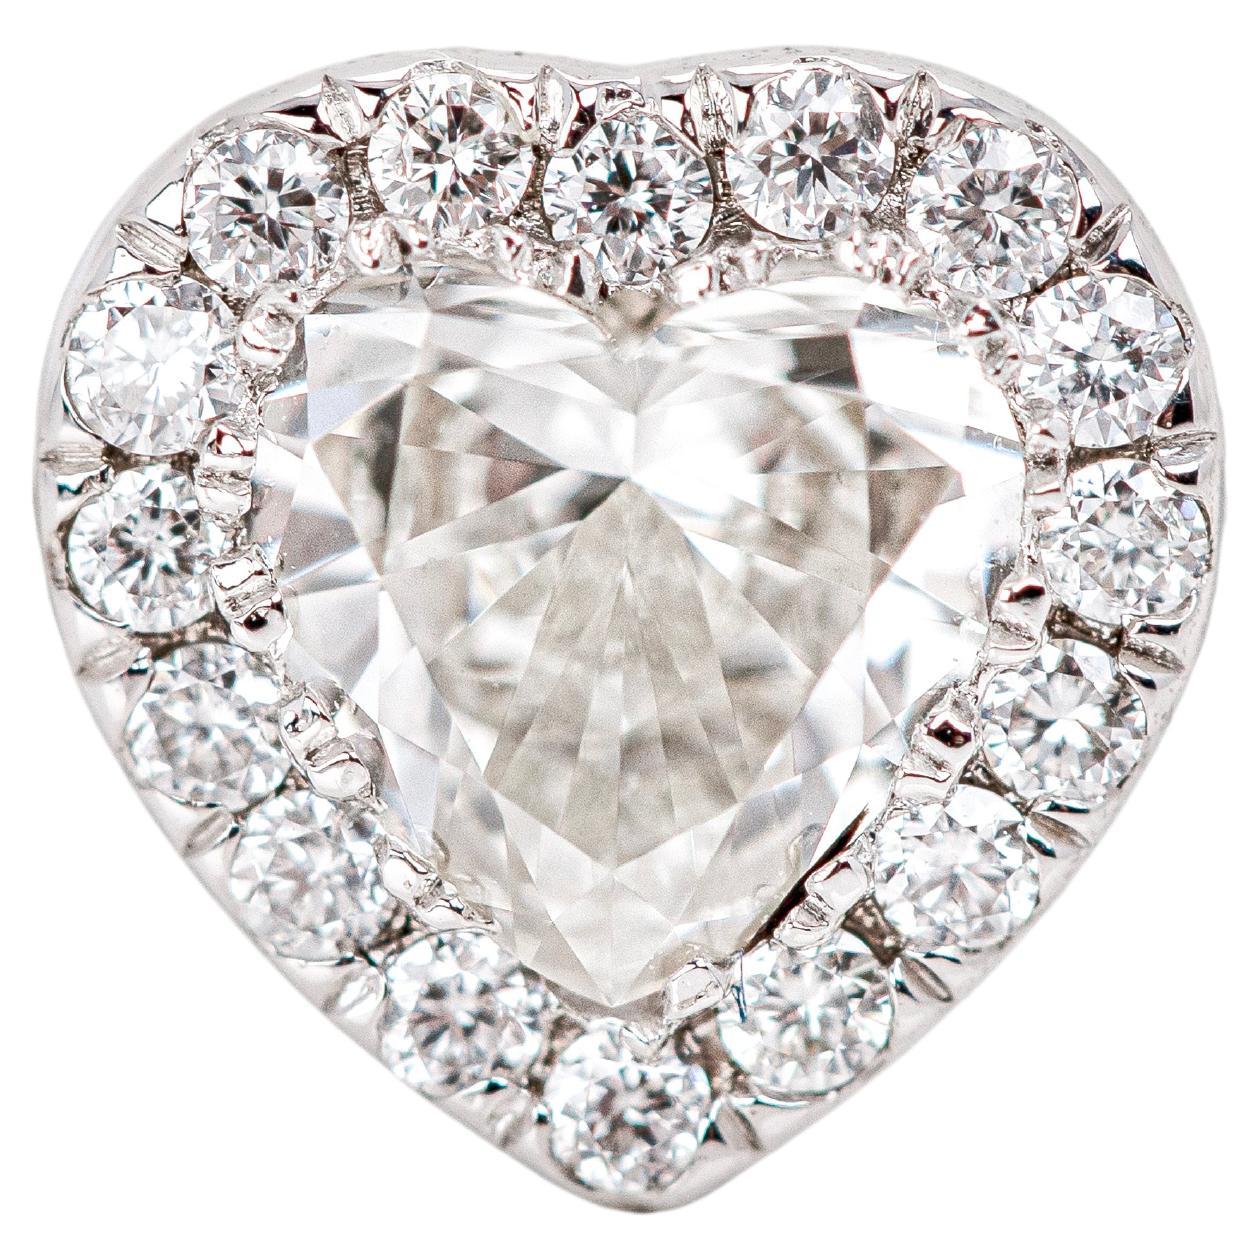 0.46 ct Heart Cut Diamond Solitaire, Diamond Solitaire Ring with Edge Stone
GIA Certified Diamond Wedding Ring,Solitaire Ring

This ring was made with quality materials and excellent handwork. I guarantee the quality assurance of my handwork and